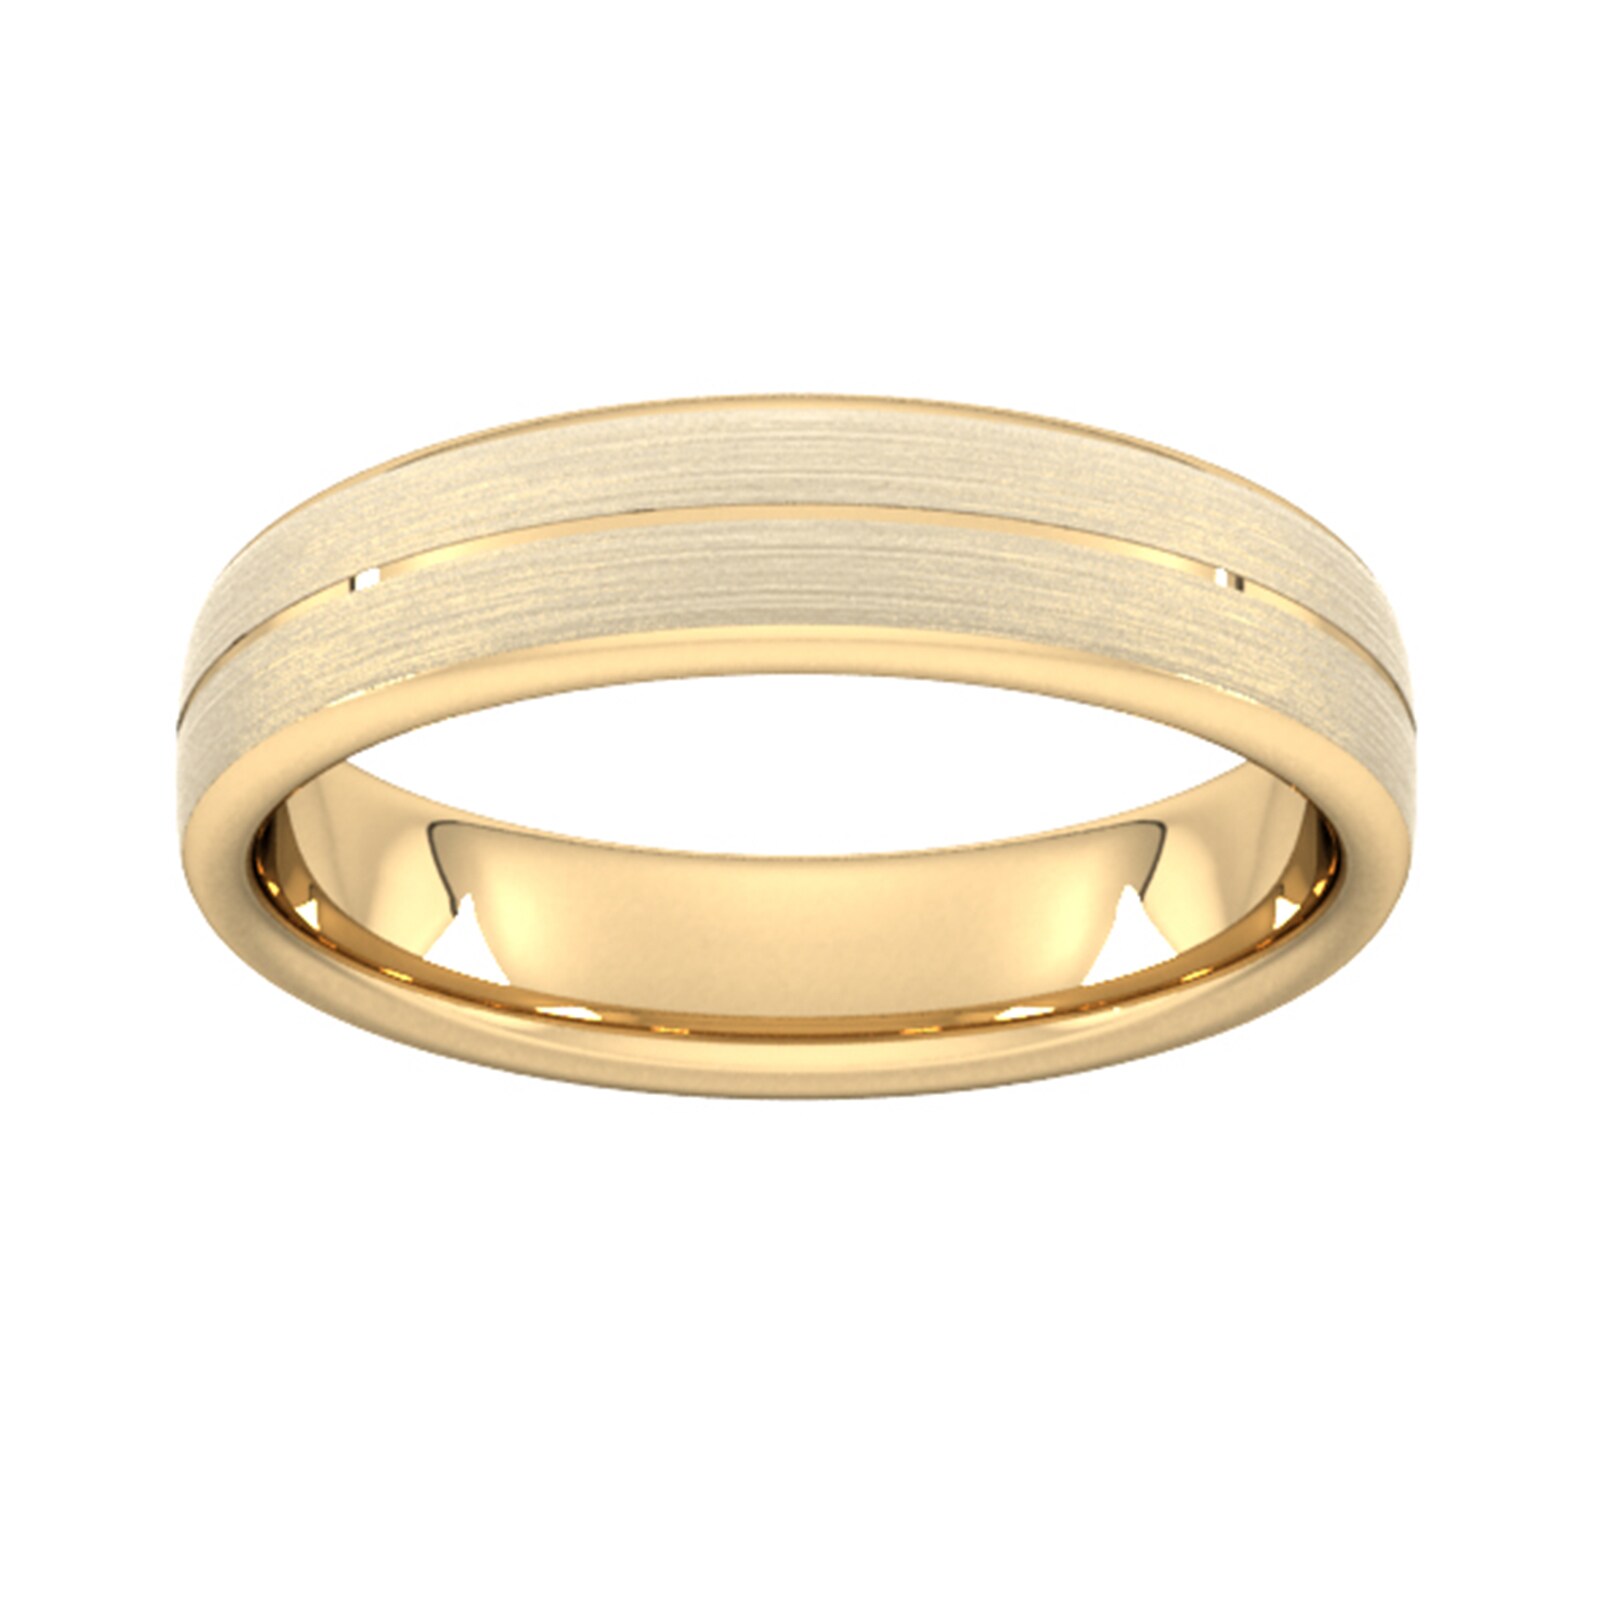 5mm Traditional Court Standard Centre Groove With Chamfered Edge Wedding Ring In 9 Carat Yellow Gold - Ring Size Q